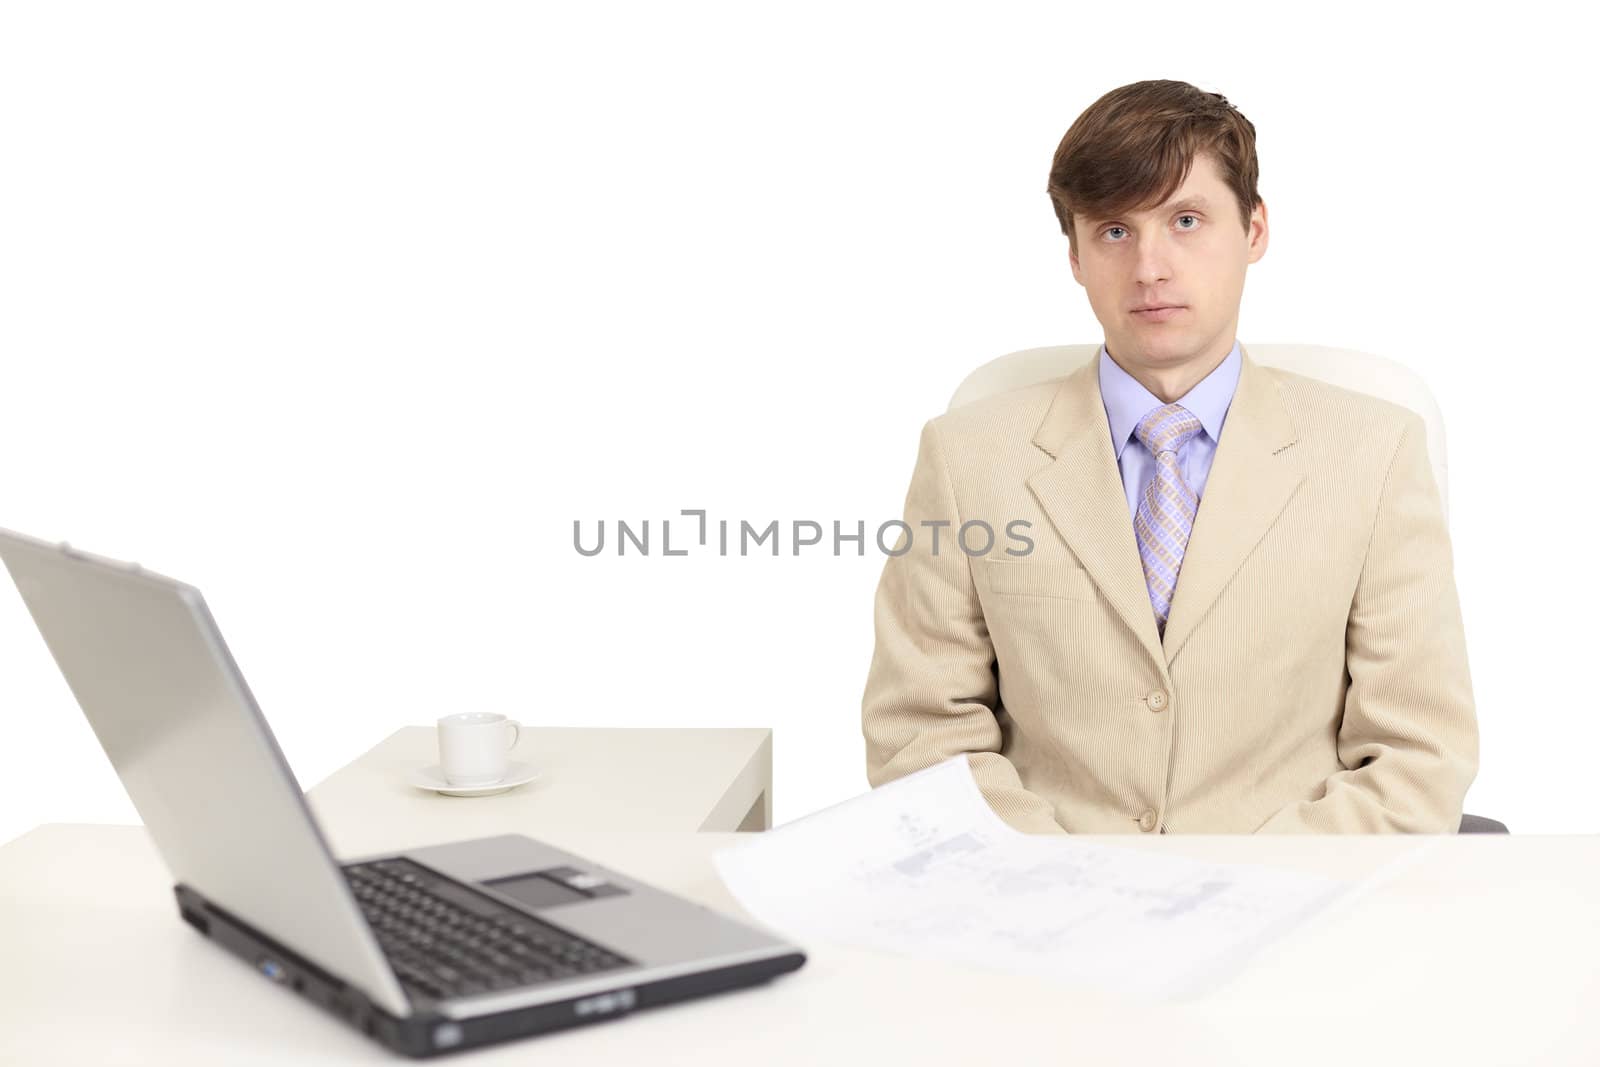 The young serious person on a workplace with the laptop